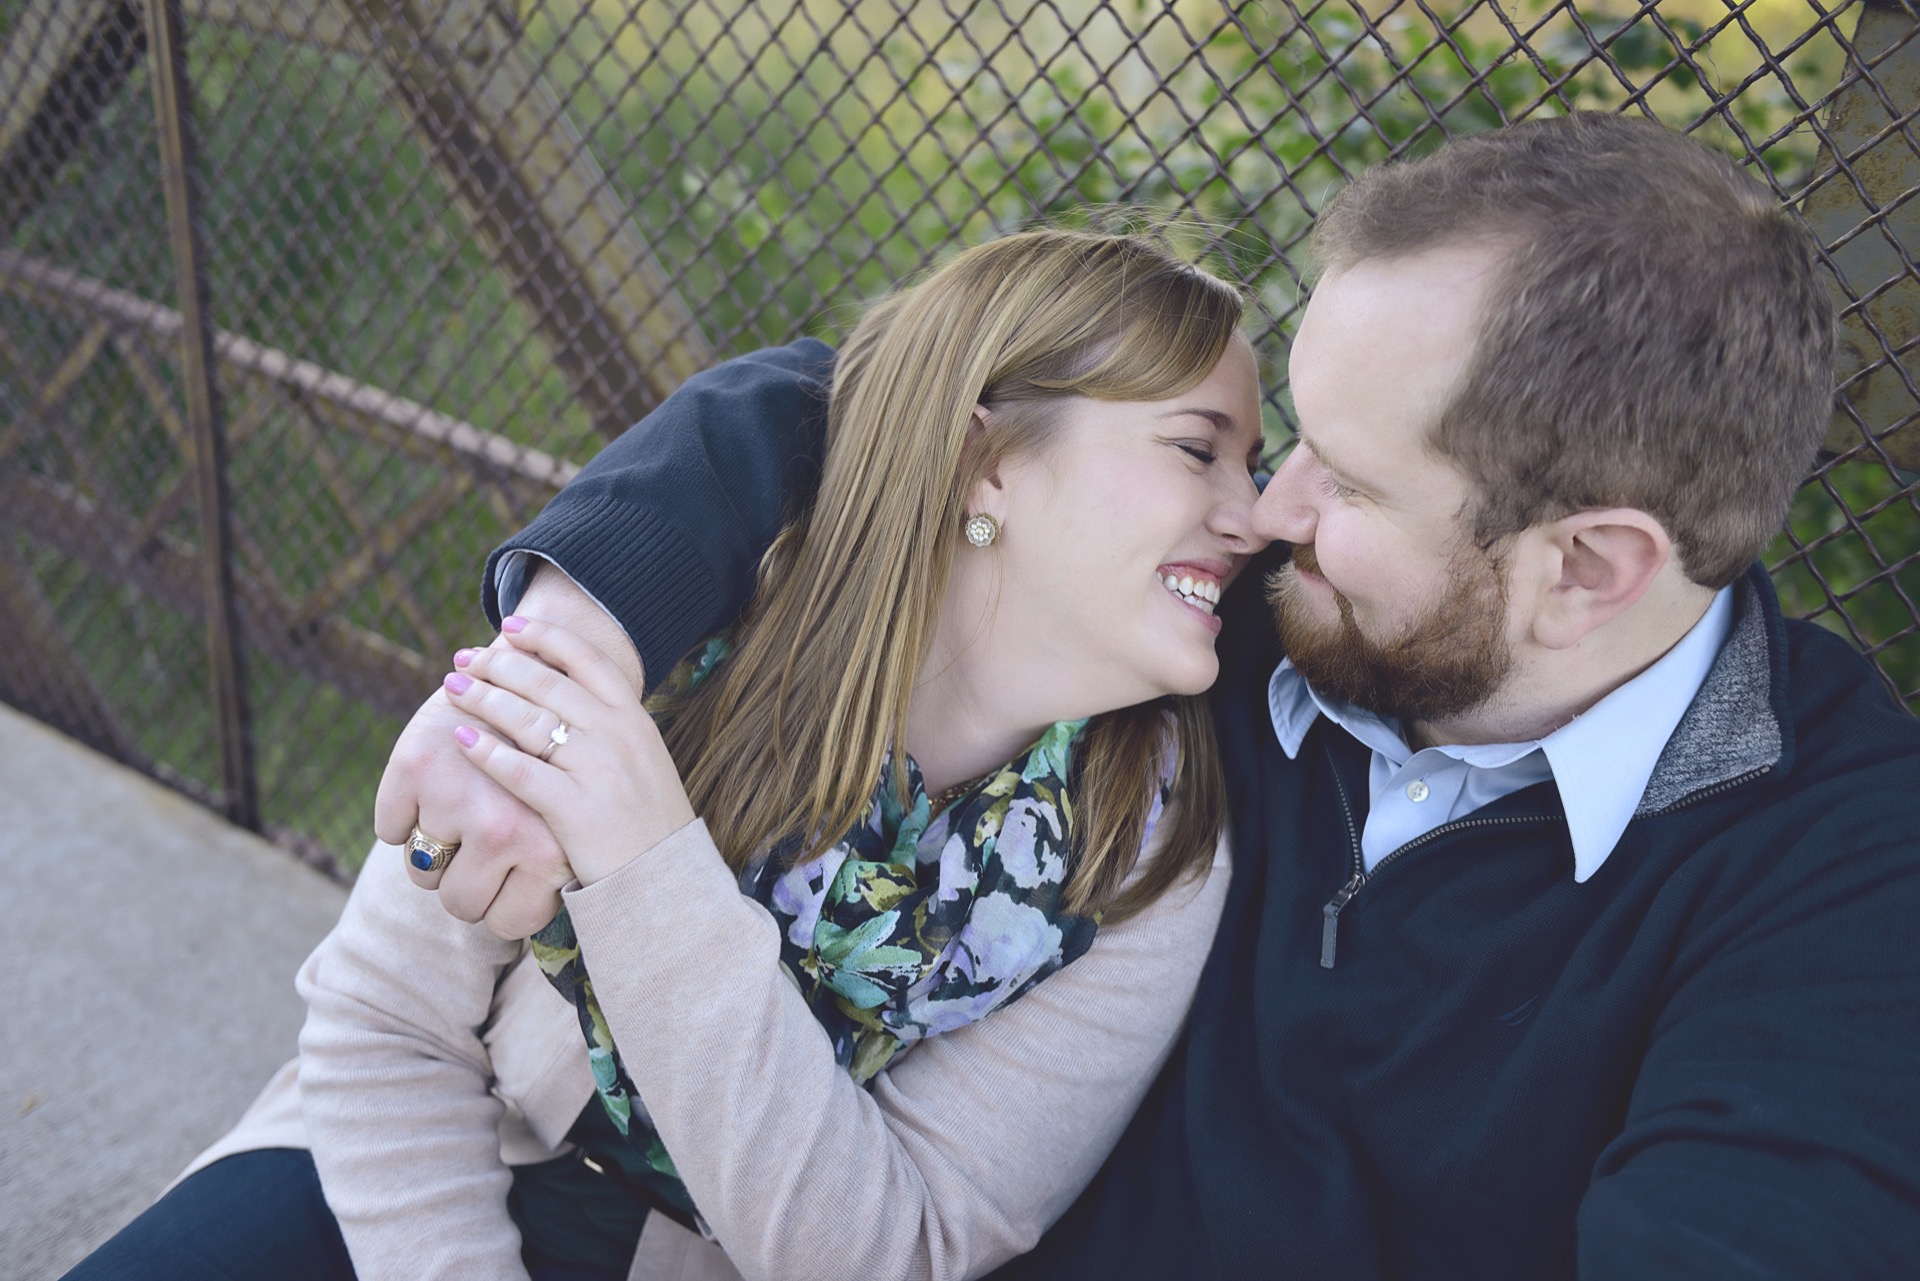 An engagement photo of Caitlin and Wyatt